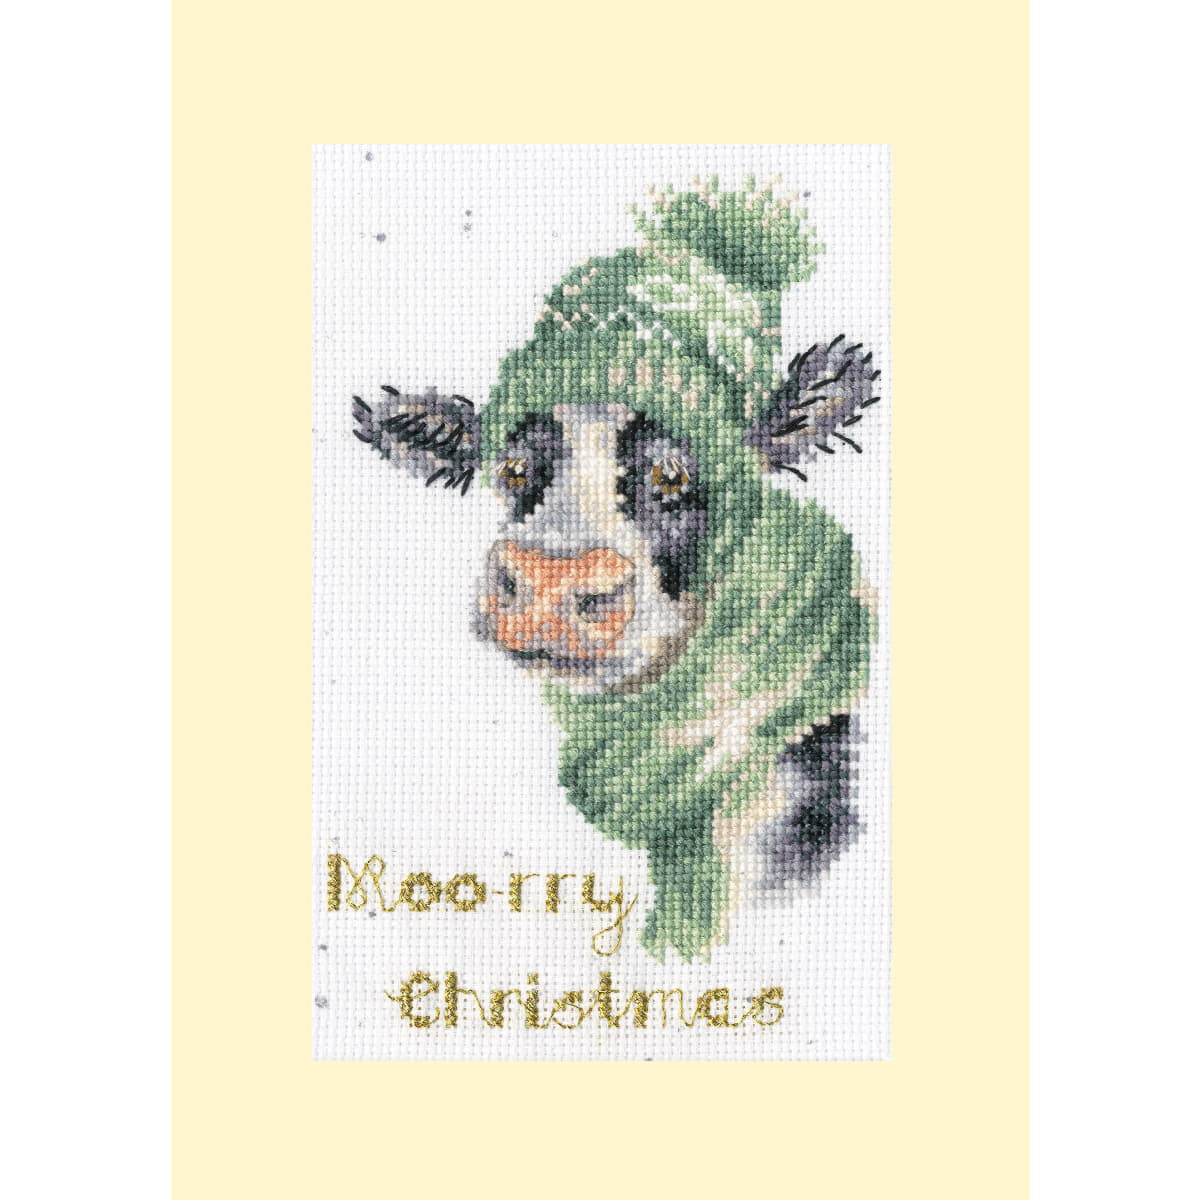 A cross stitch picture of a cow with a green knitted hat...